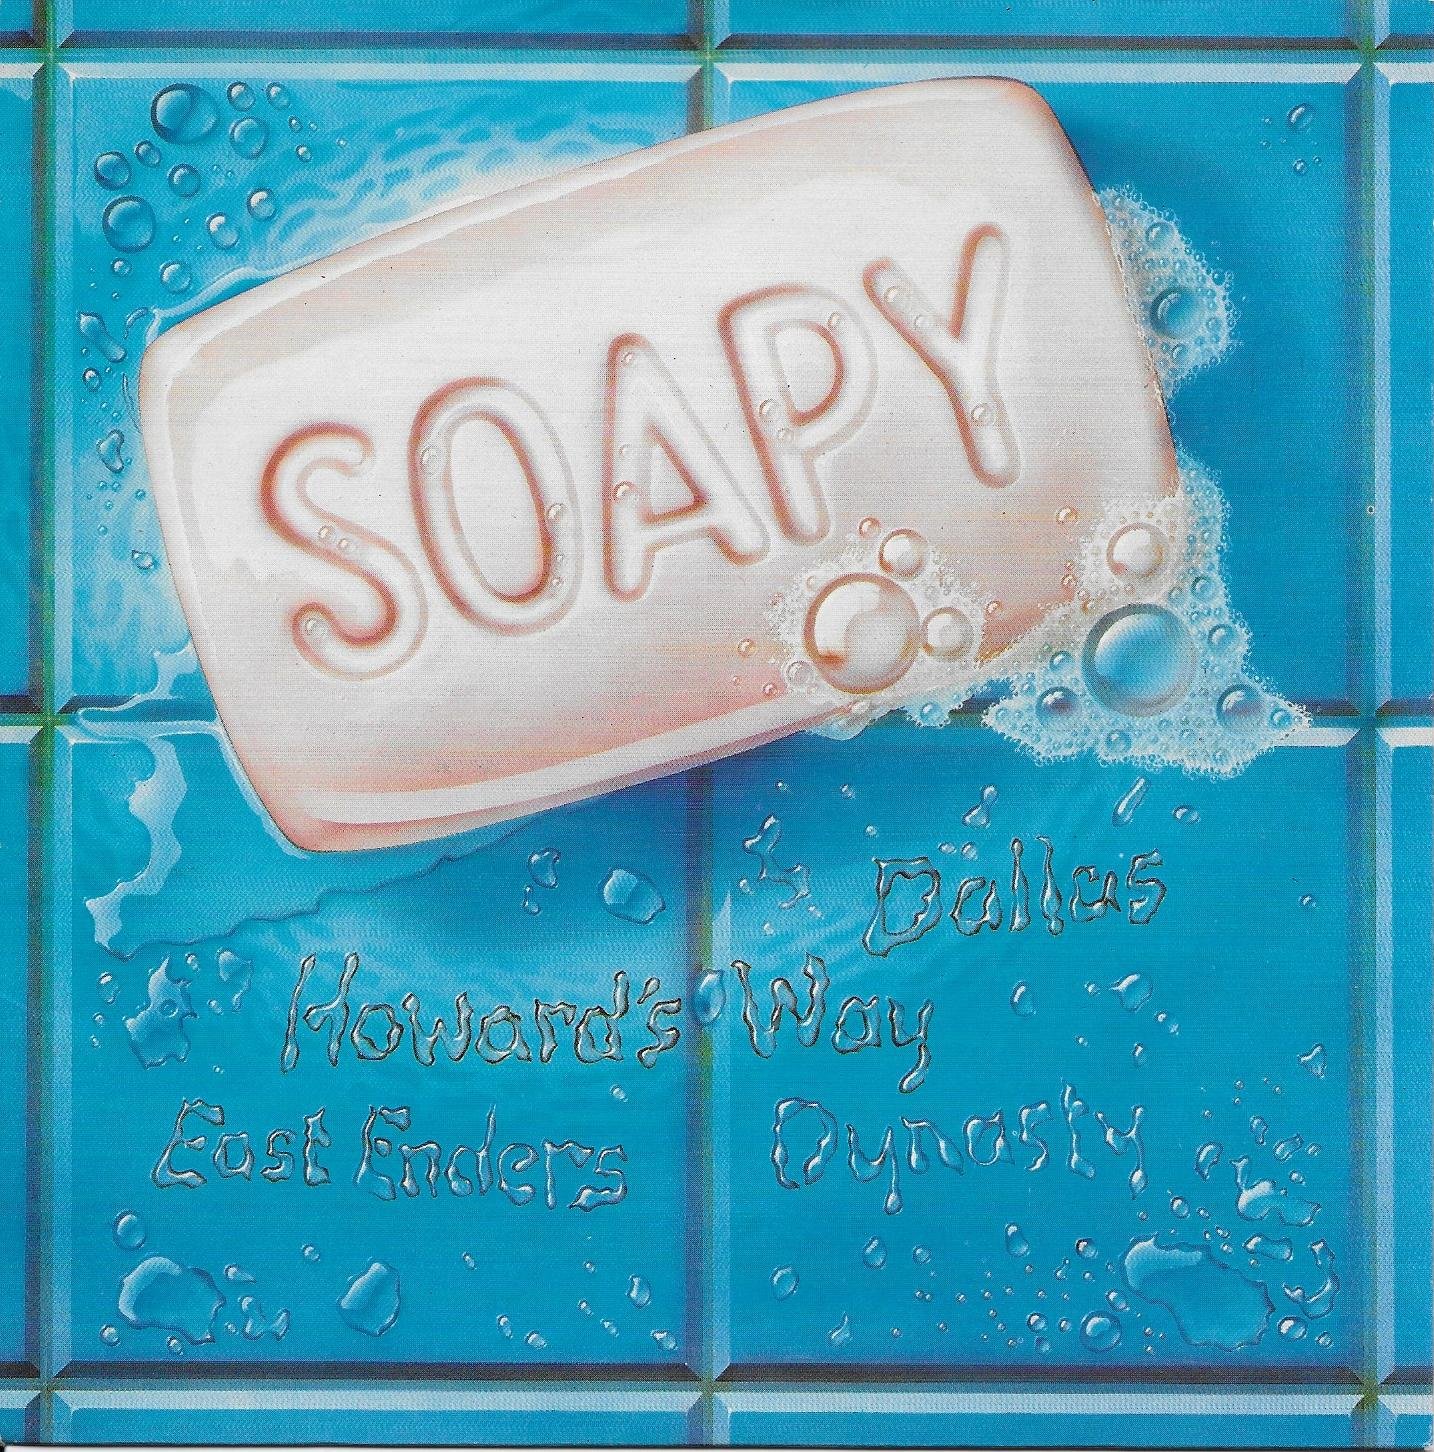 Picture of RESL 206 Soapy by artist Top of the Box from the BBC singles - Records and Tapes library